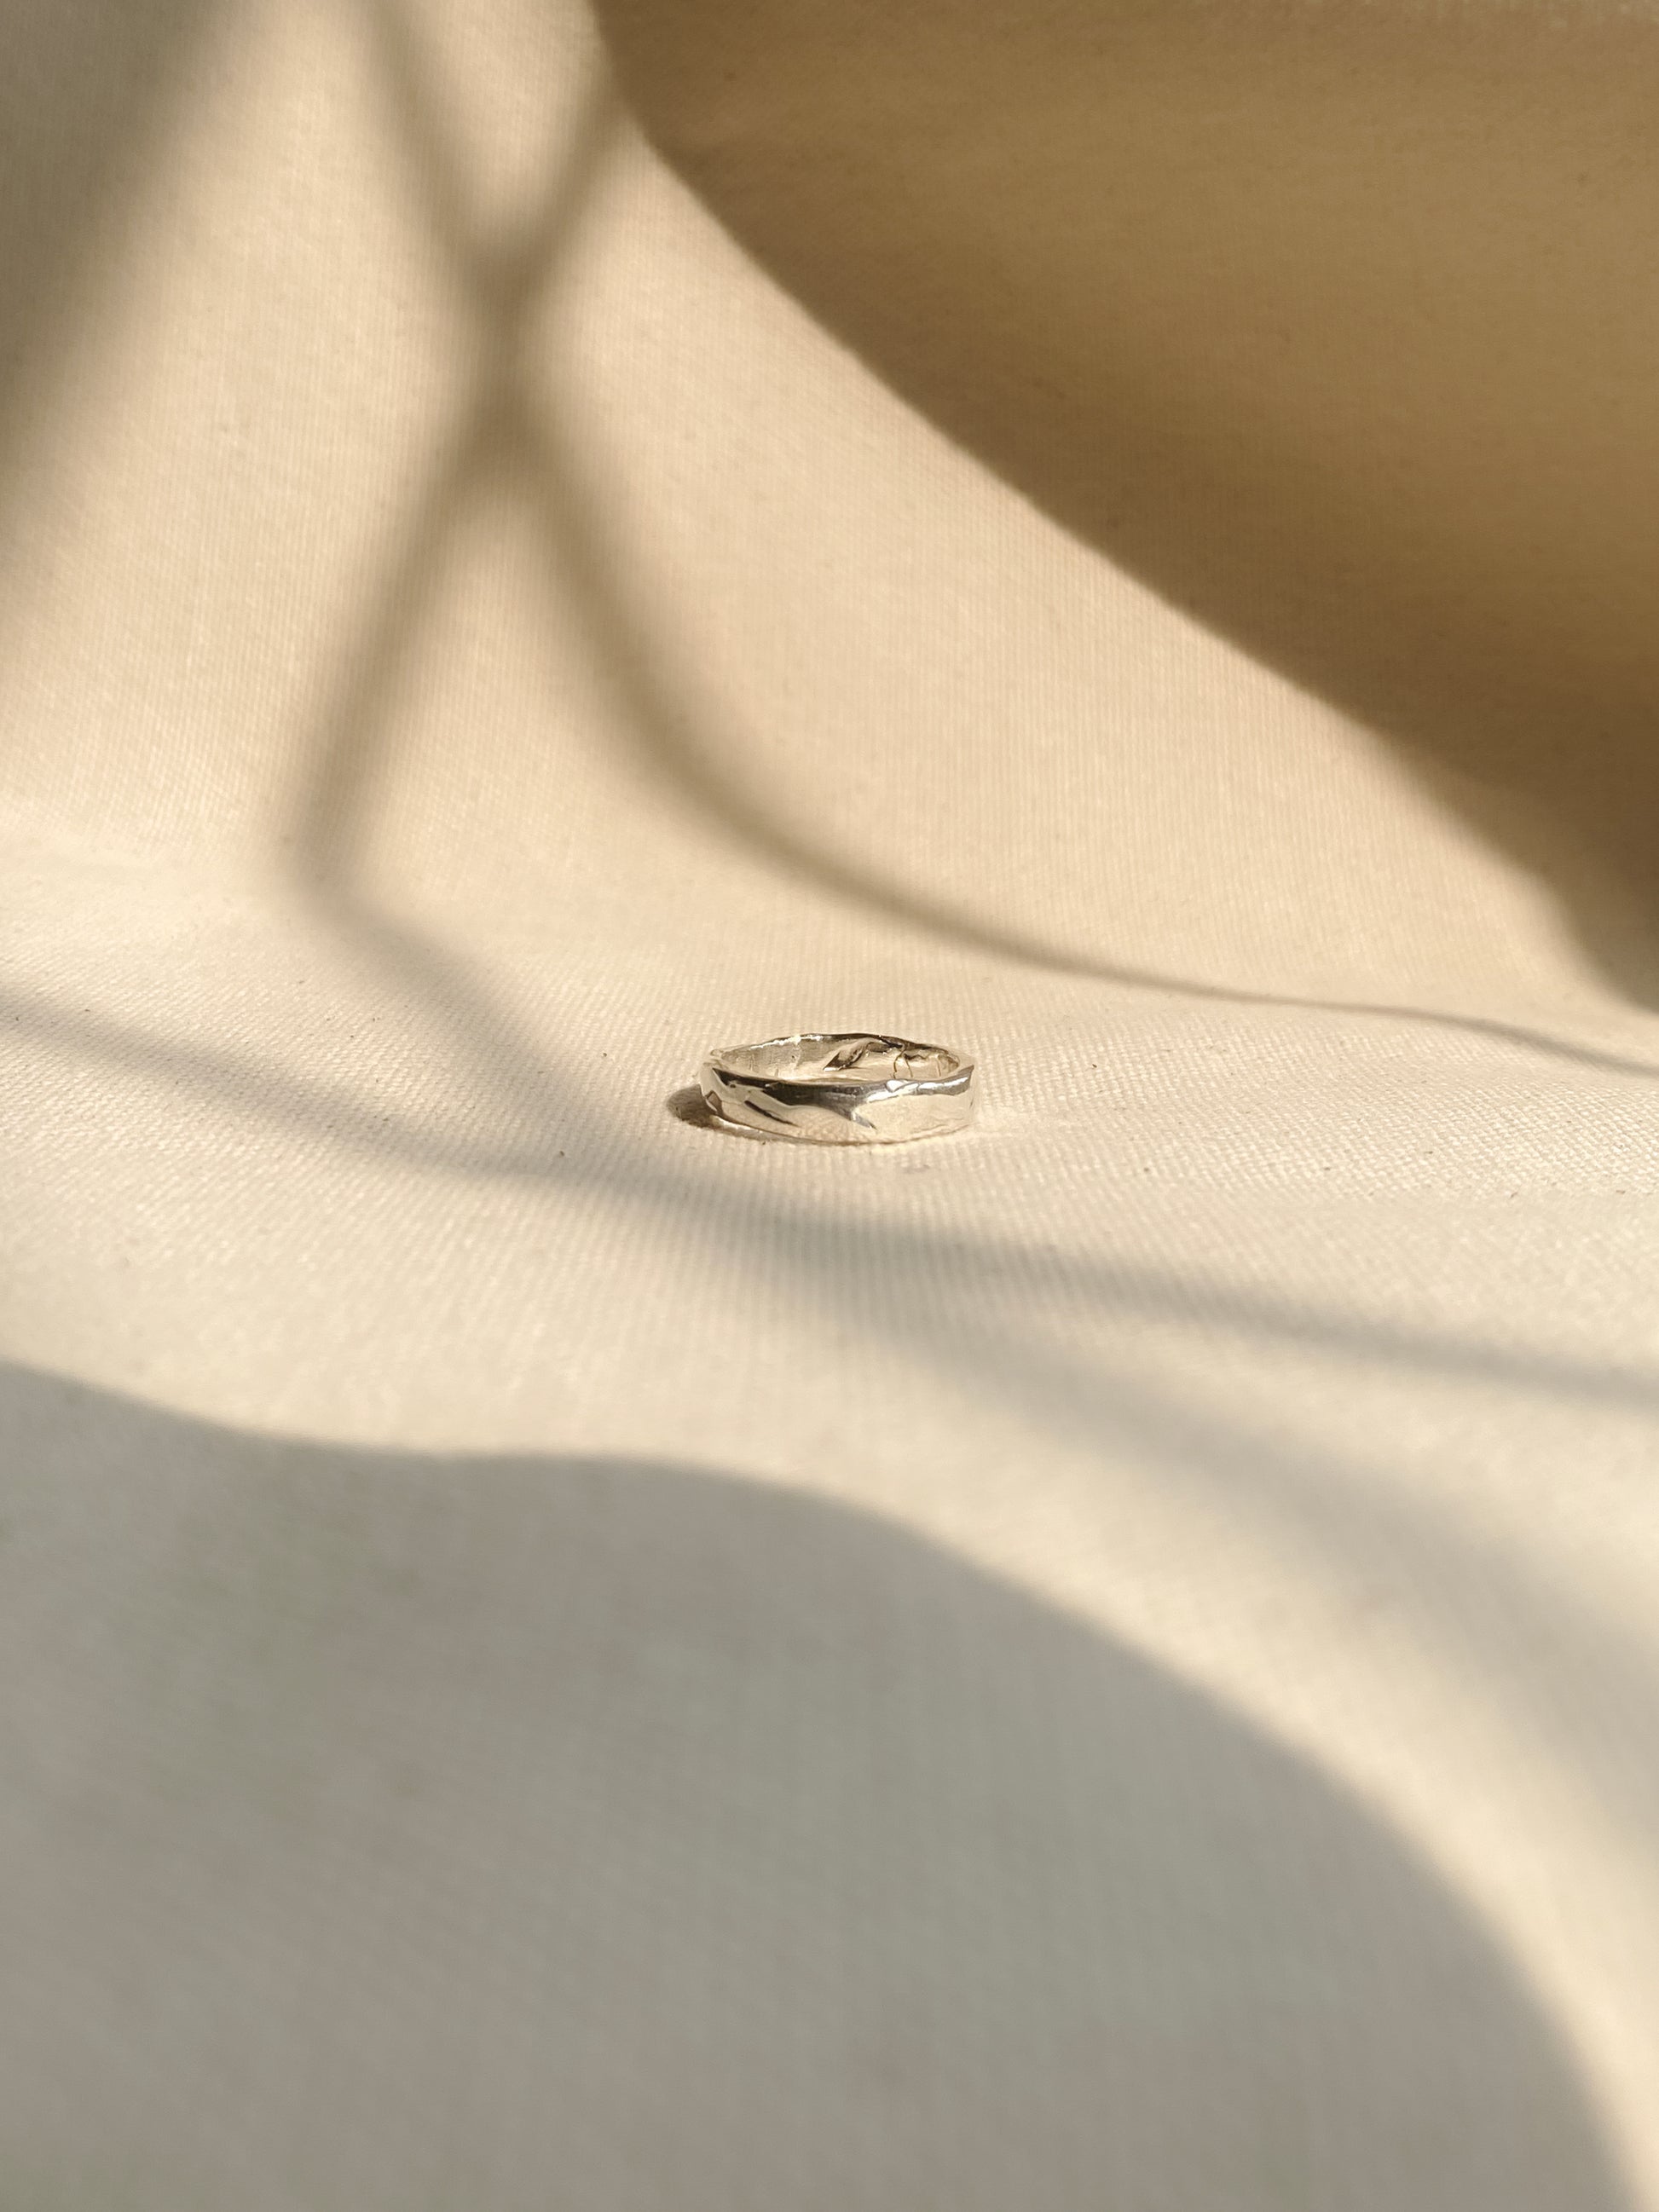 Unique textured silver ring, laying on canvas